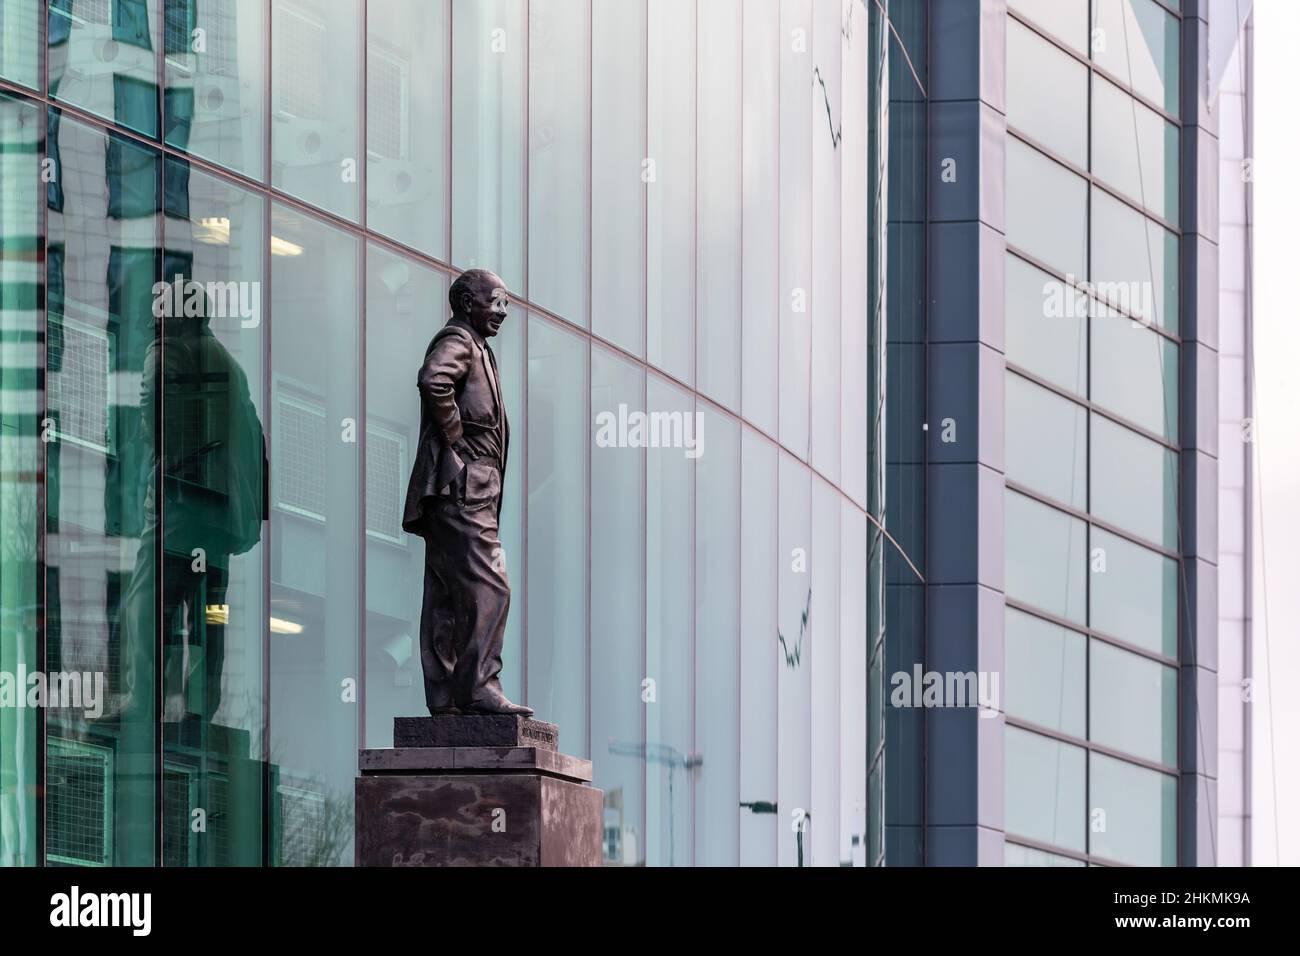 Old Trafford football ground, home to Manchester United FC. Sir Matt Busby statue. Stock Photo